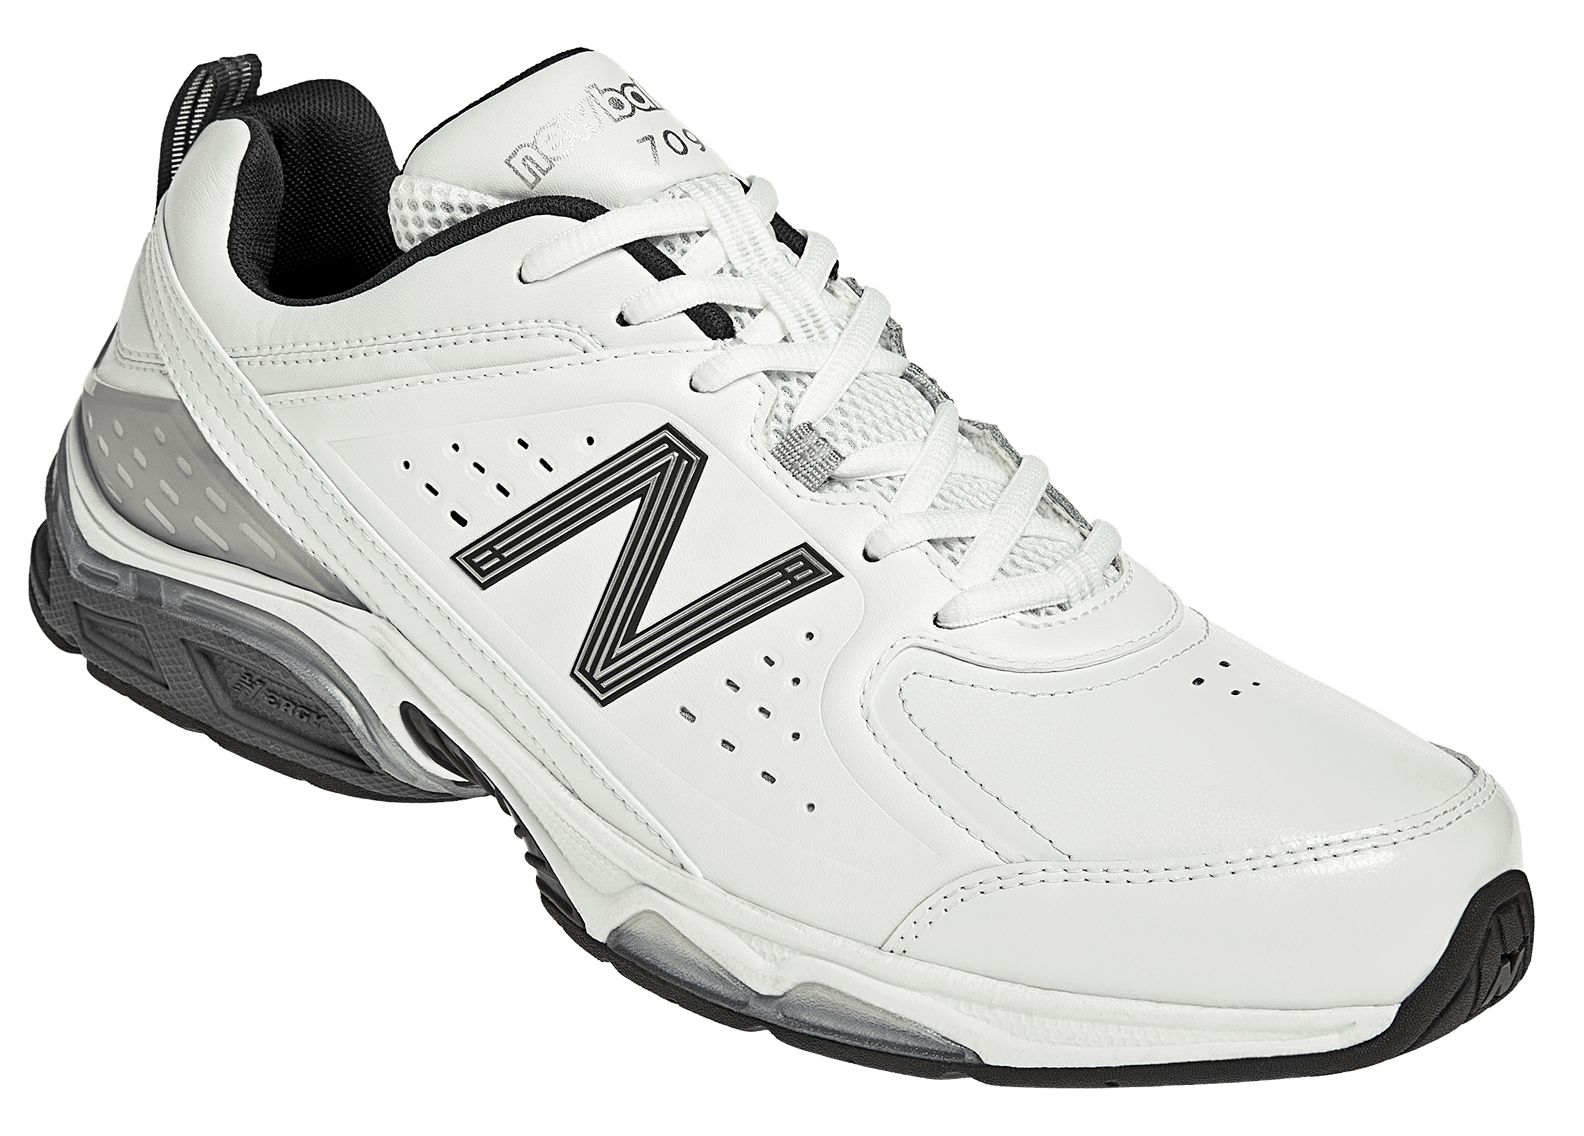 Off on MX709WT at Joe's New Balance Outlet